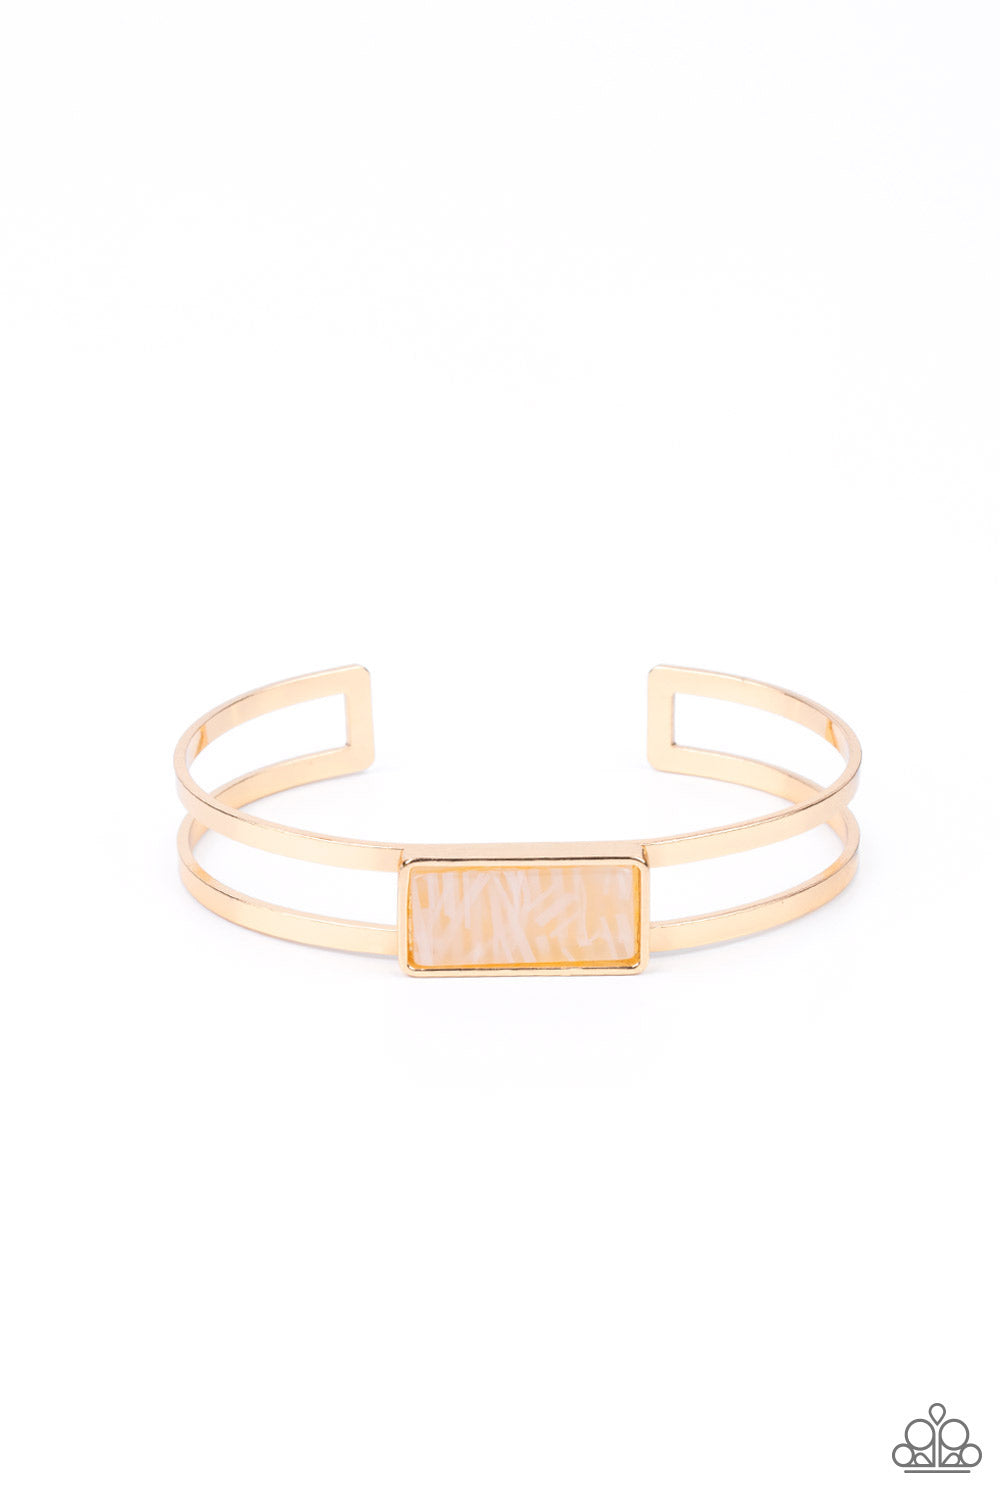 Remarkably Cute and Resolute - Gold Cuff Bracelet - Paparazzi Accessories